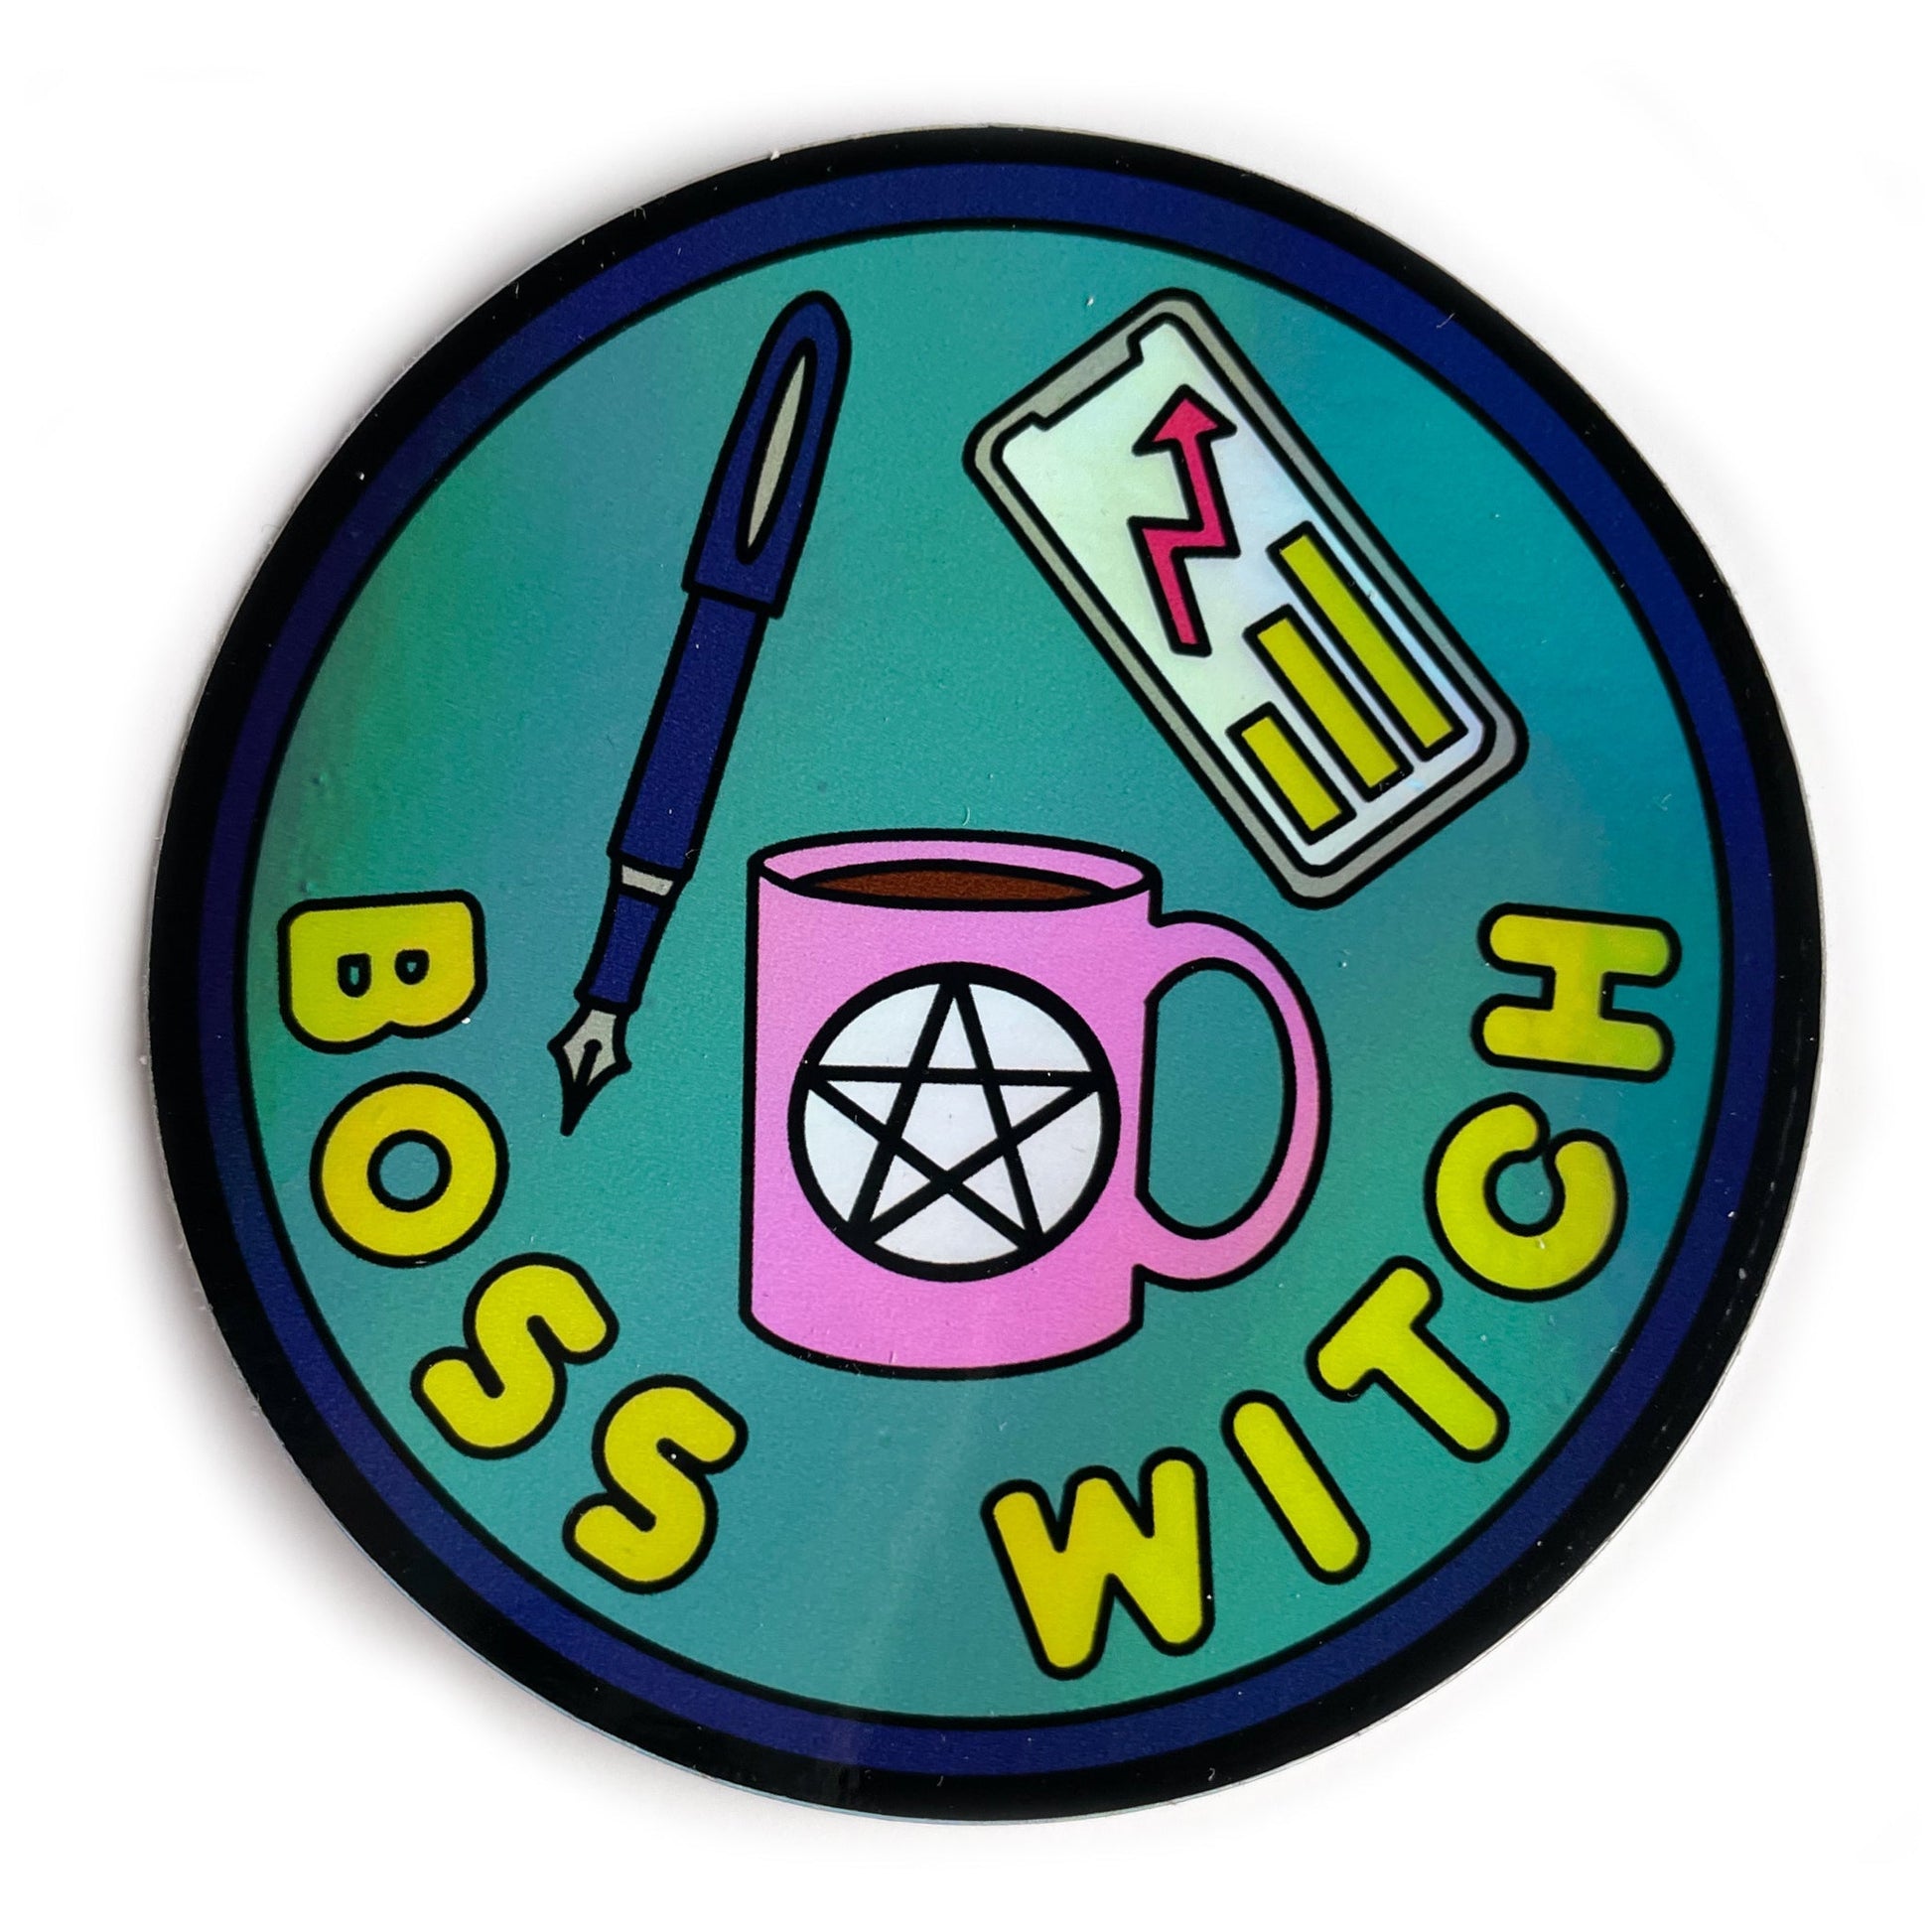 A circular holographic sticker. It has a dark purple border with lime green text that reads "Boss Witch". There is a pink coffee cup with a pentacle on it, a purple fountain pen, and a phone with a business graph depicted above the words.